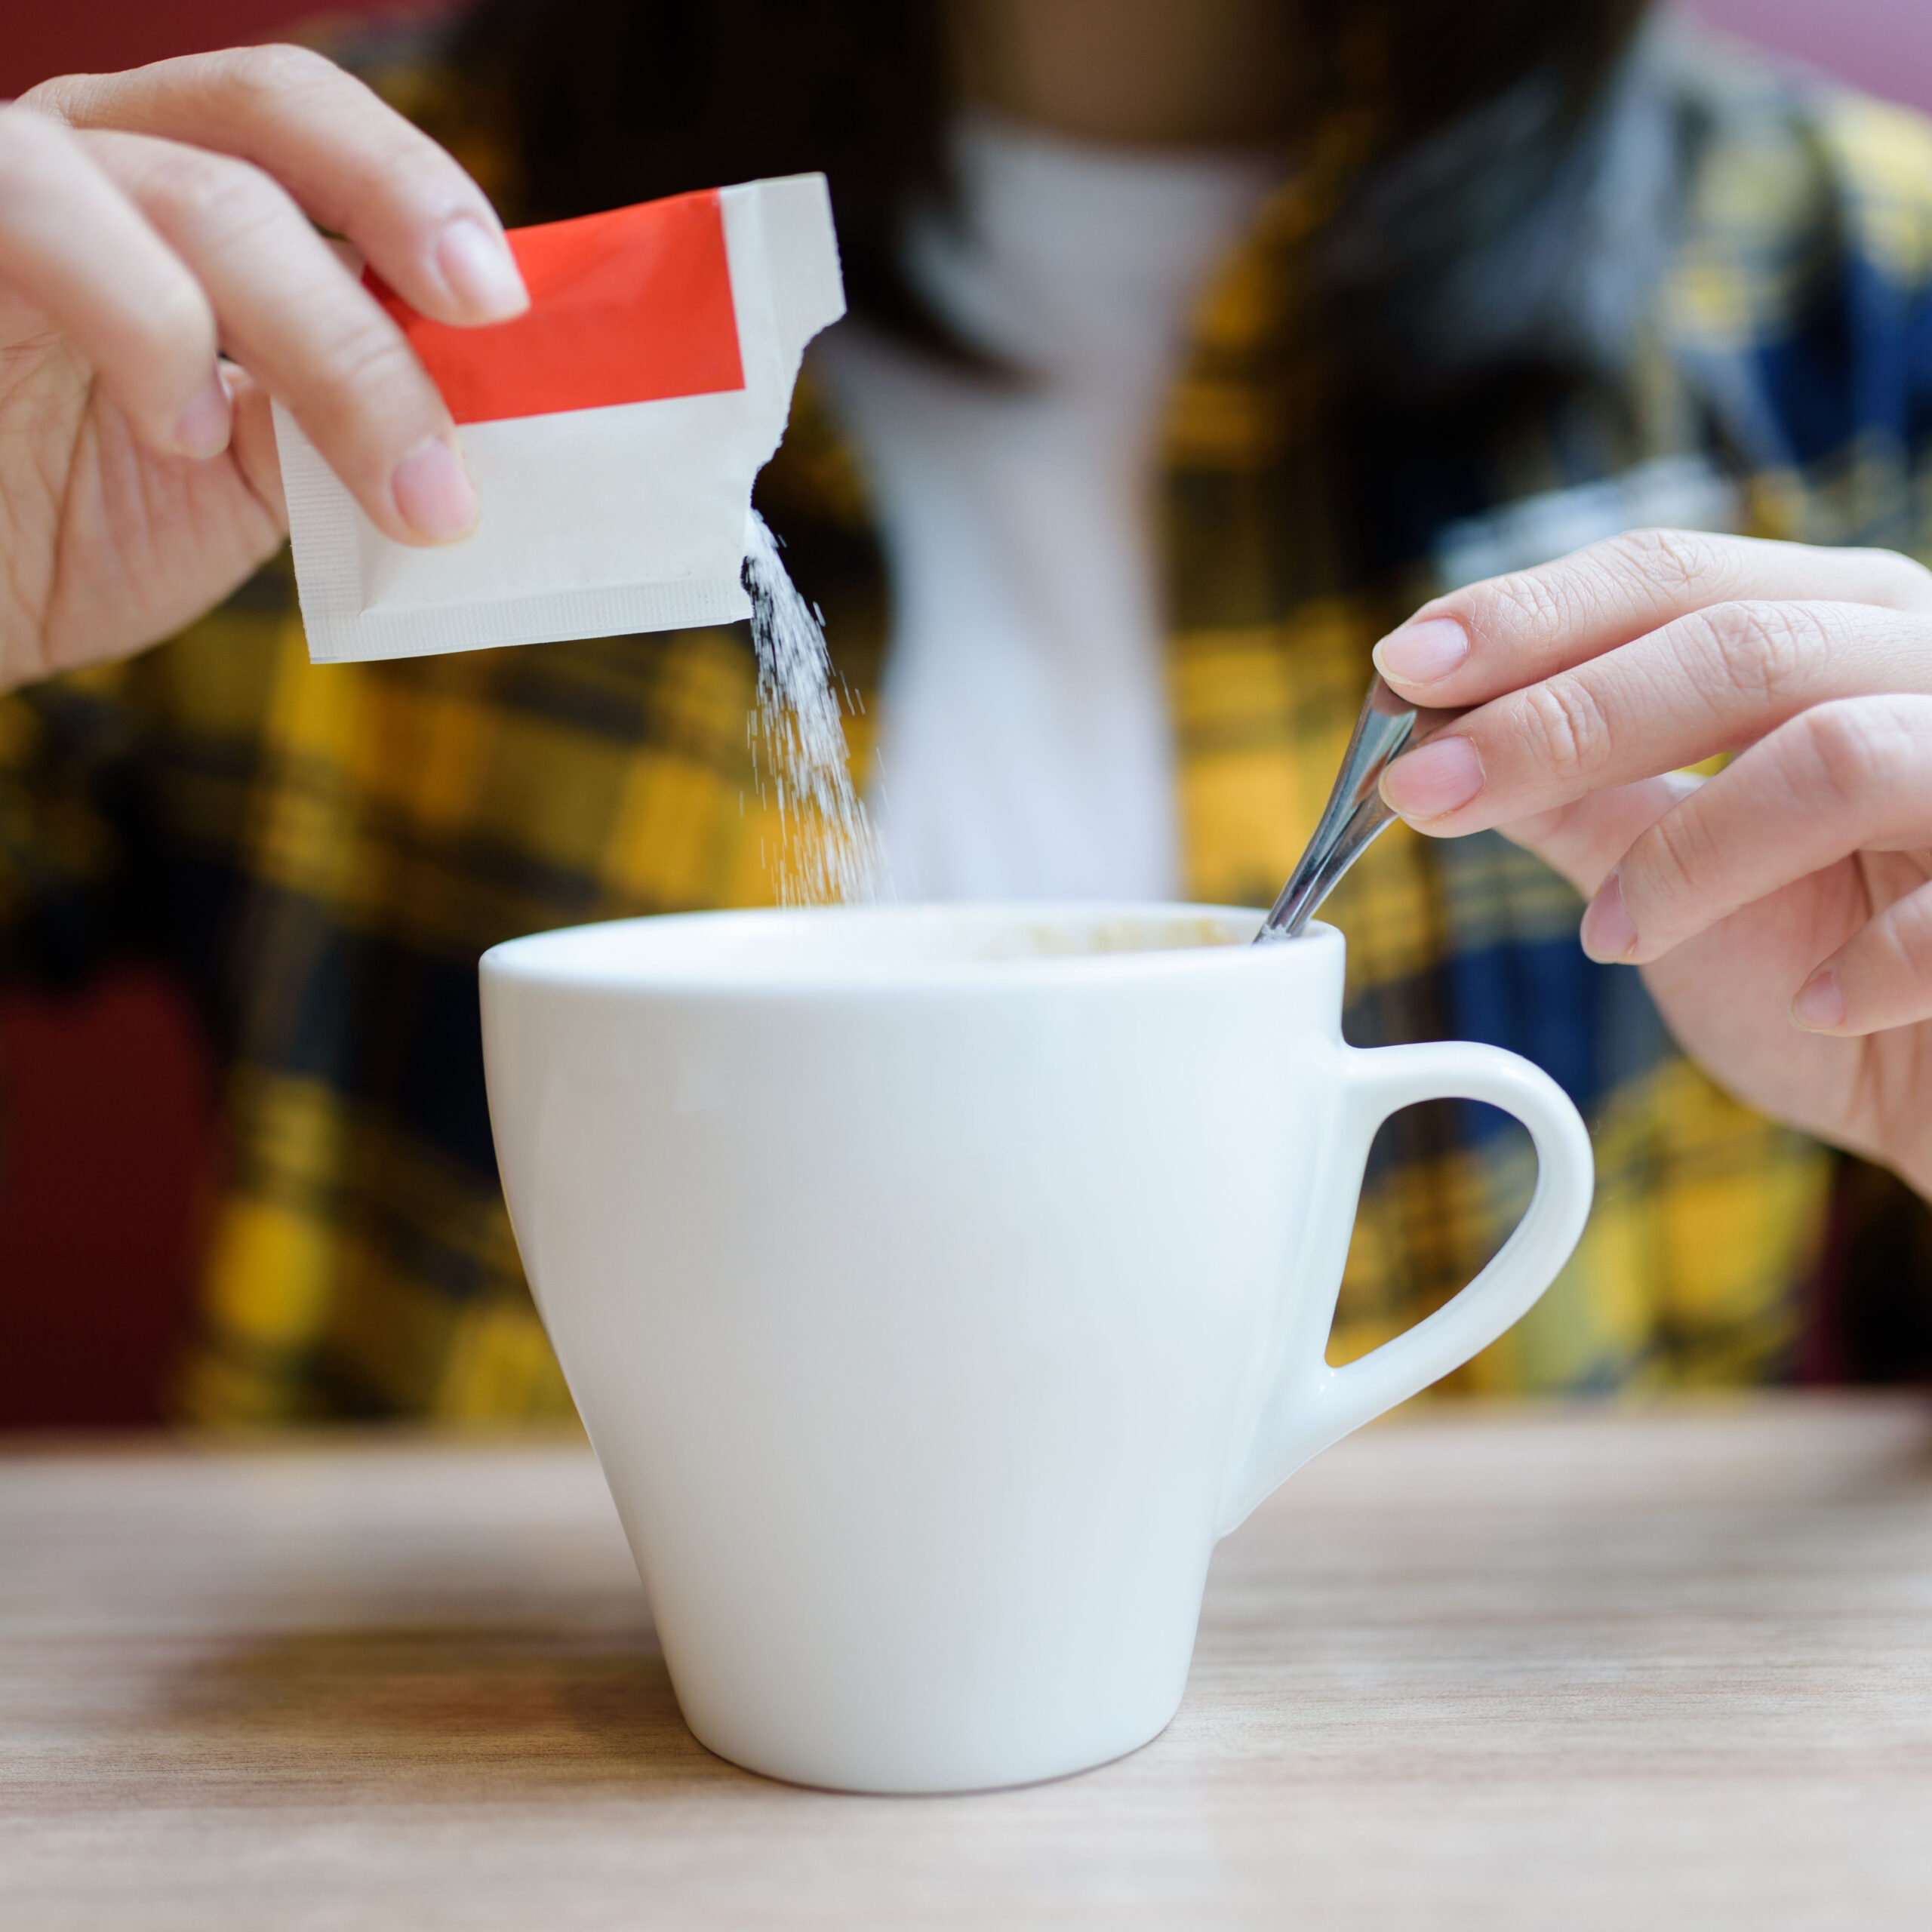 person pouring artificial sweetener packet into cup of coffee